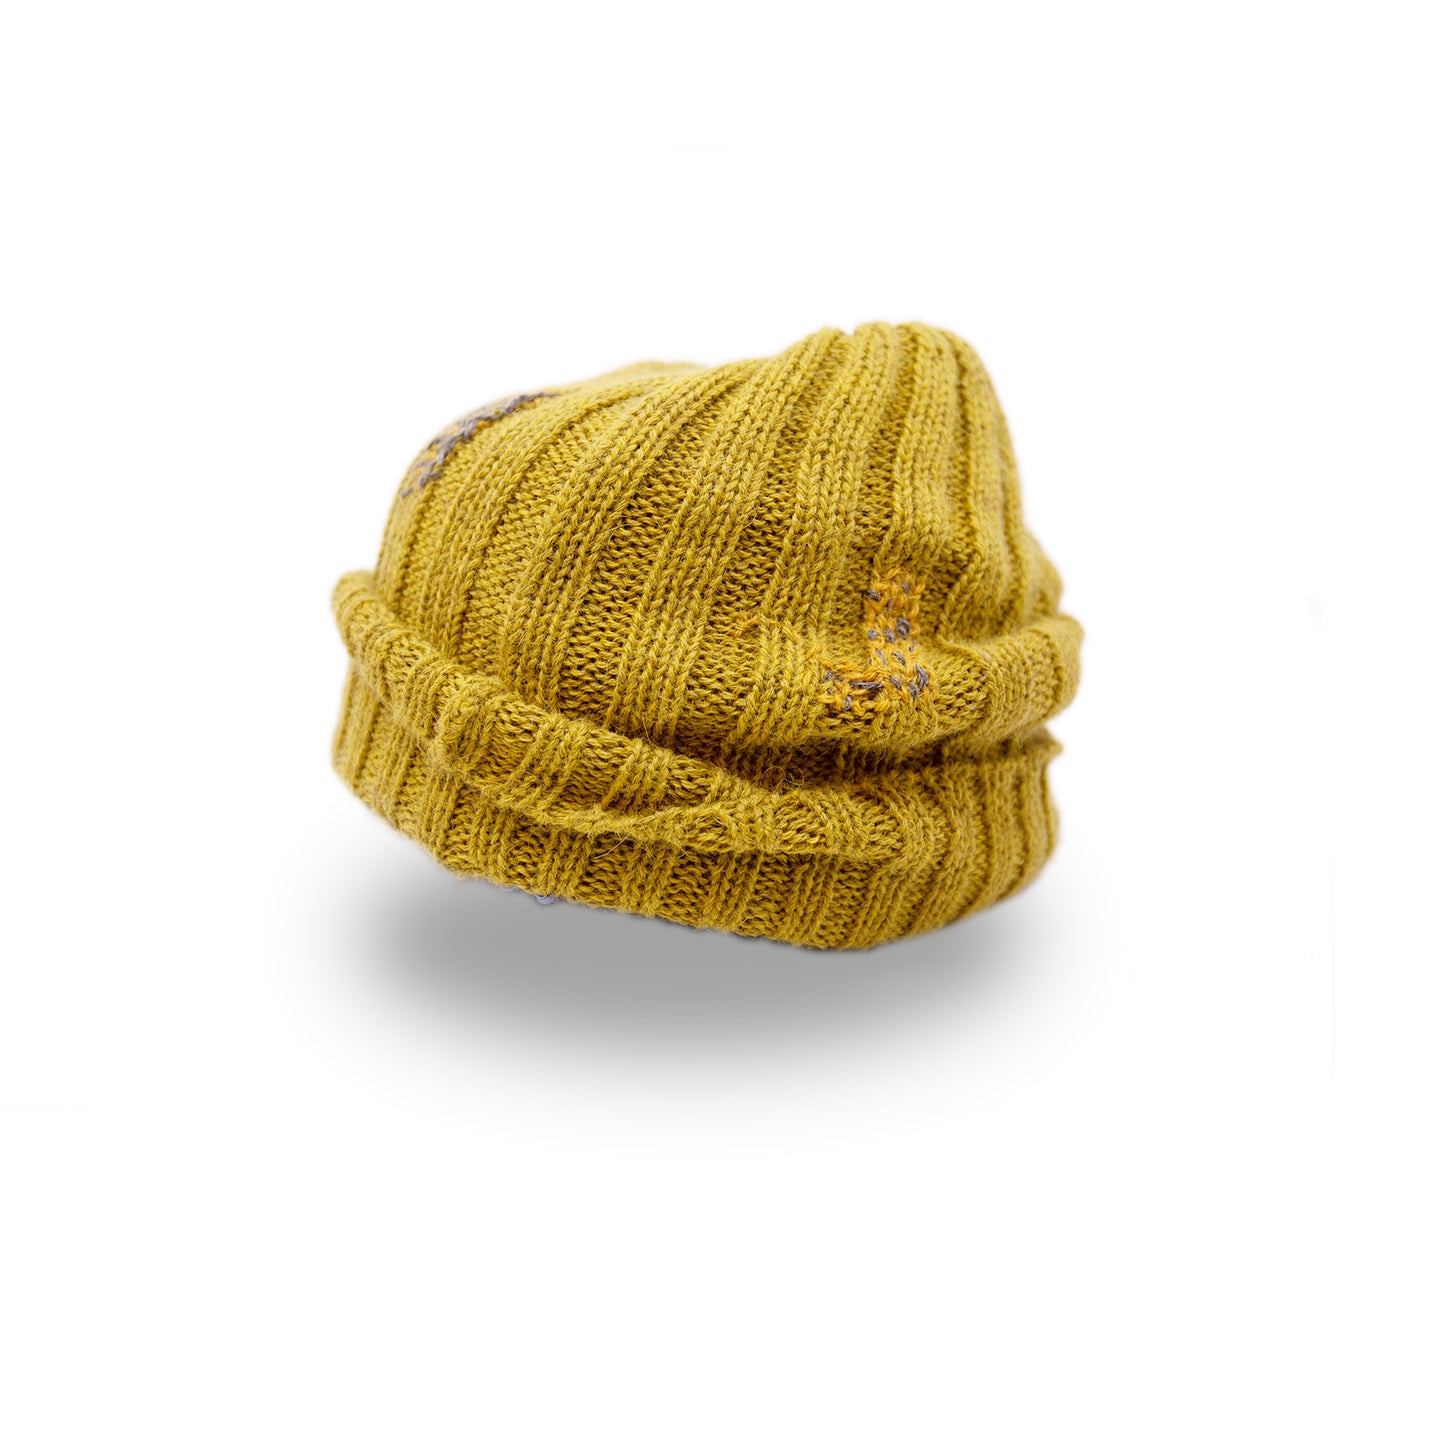 100% Baby Alpaca wool ribbed beanie in Olive Oil  Multicolored hand-embroidered mending  Made in Los Angeles